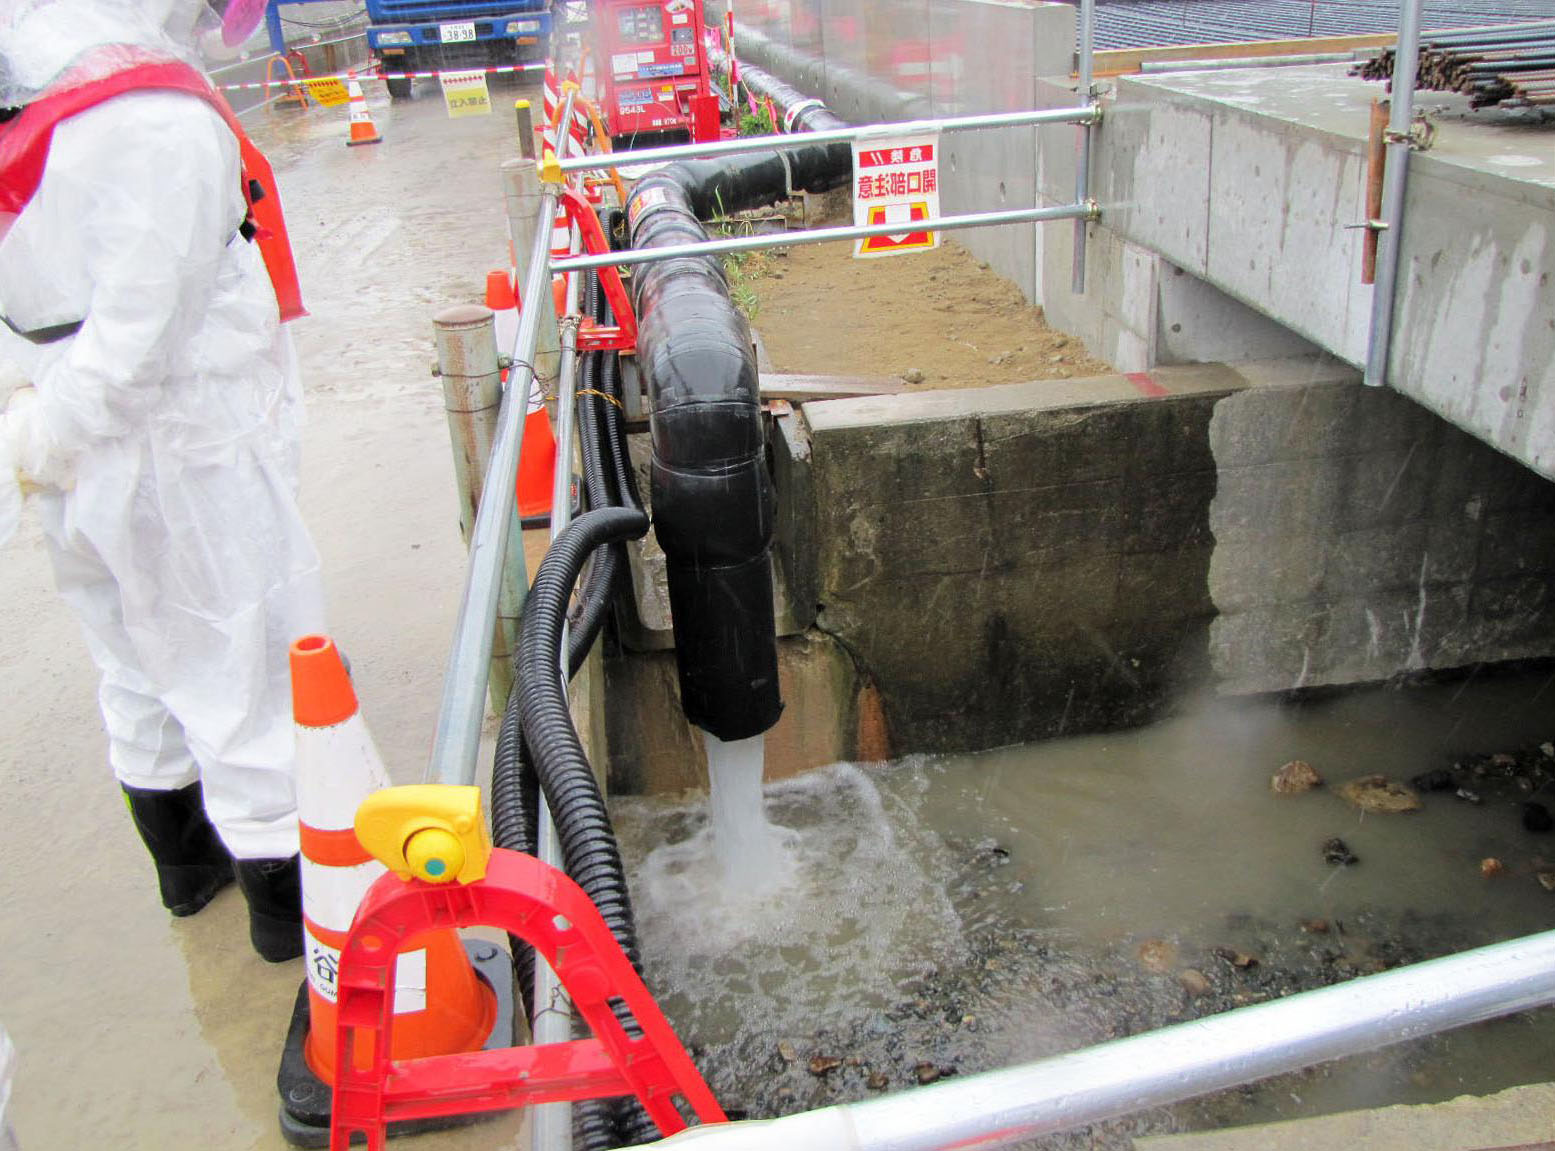 Water is pumped into a drainage ditch at the Fukushima No. 1 plant on Wednesday. | TEPCO/ KYODO